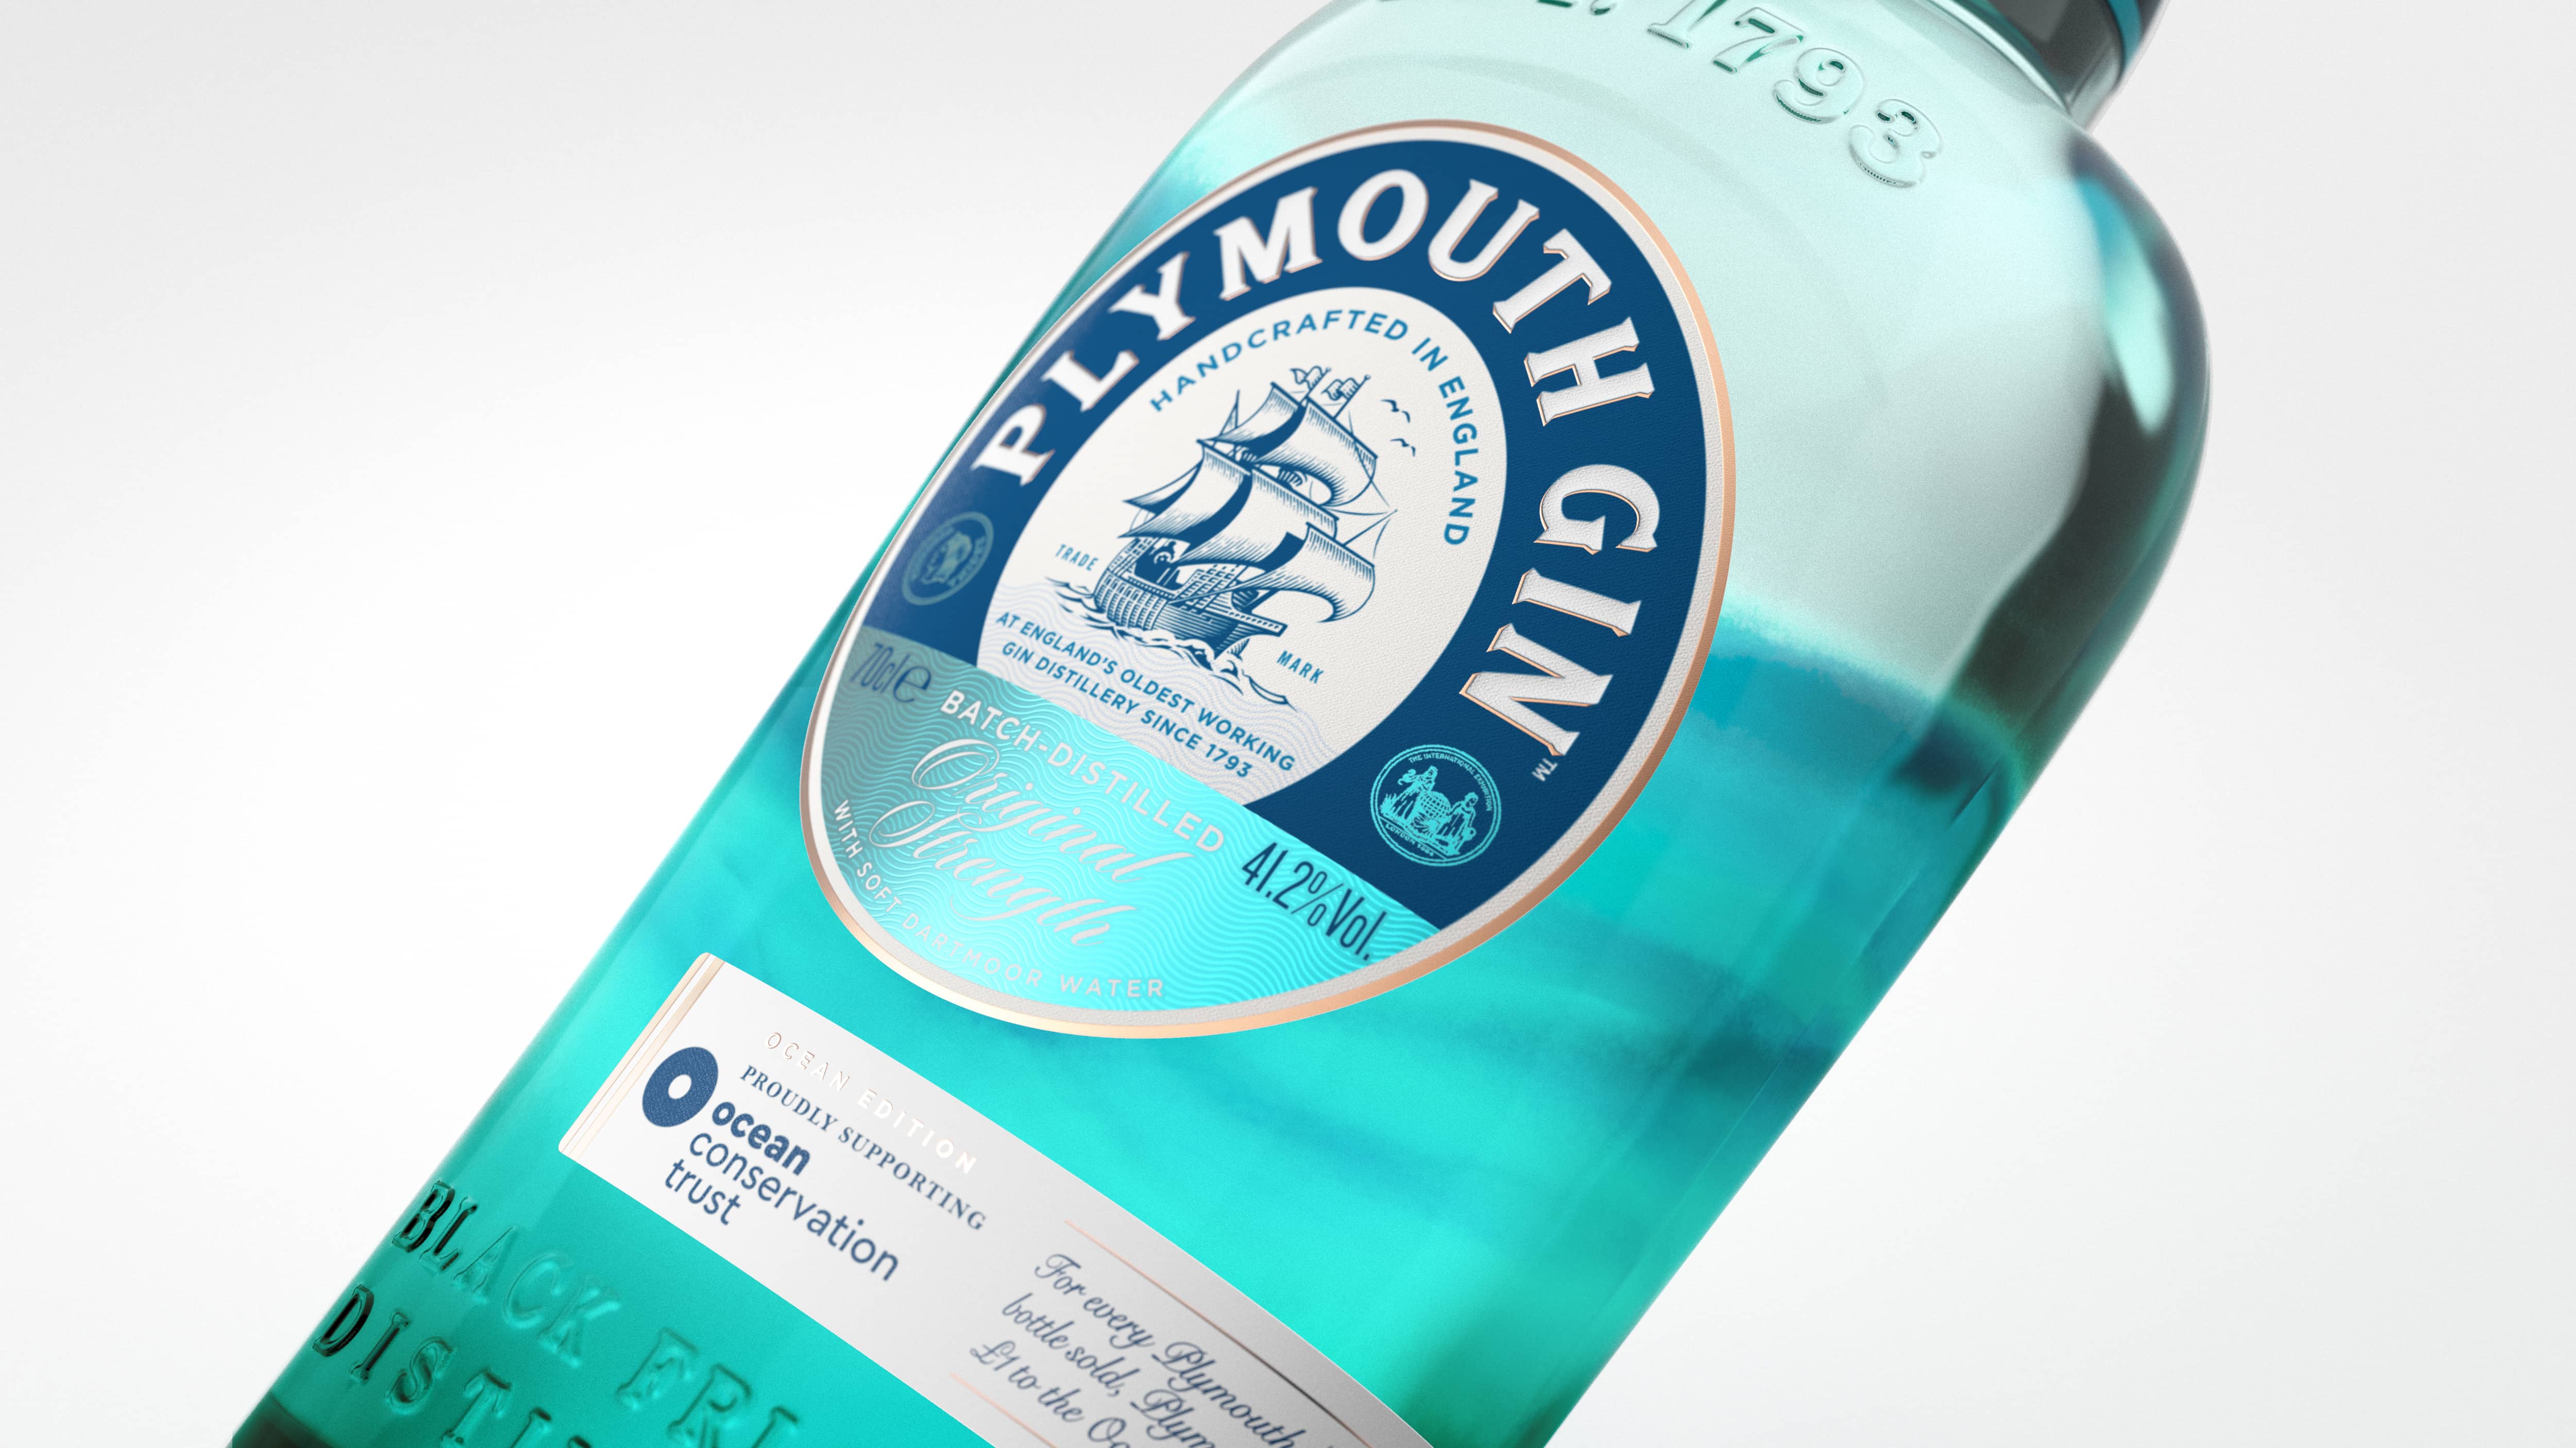 Making Waves, Boundless Brand Design Designs Plymouth Gin’s New Limited Edition Bottle, In Partnership With Ocean Conservation Trust